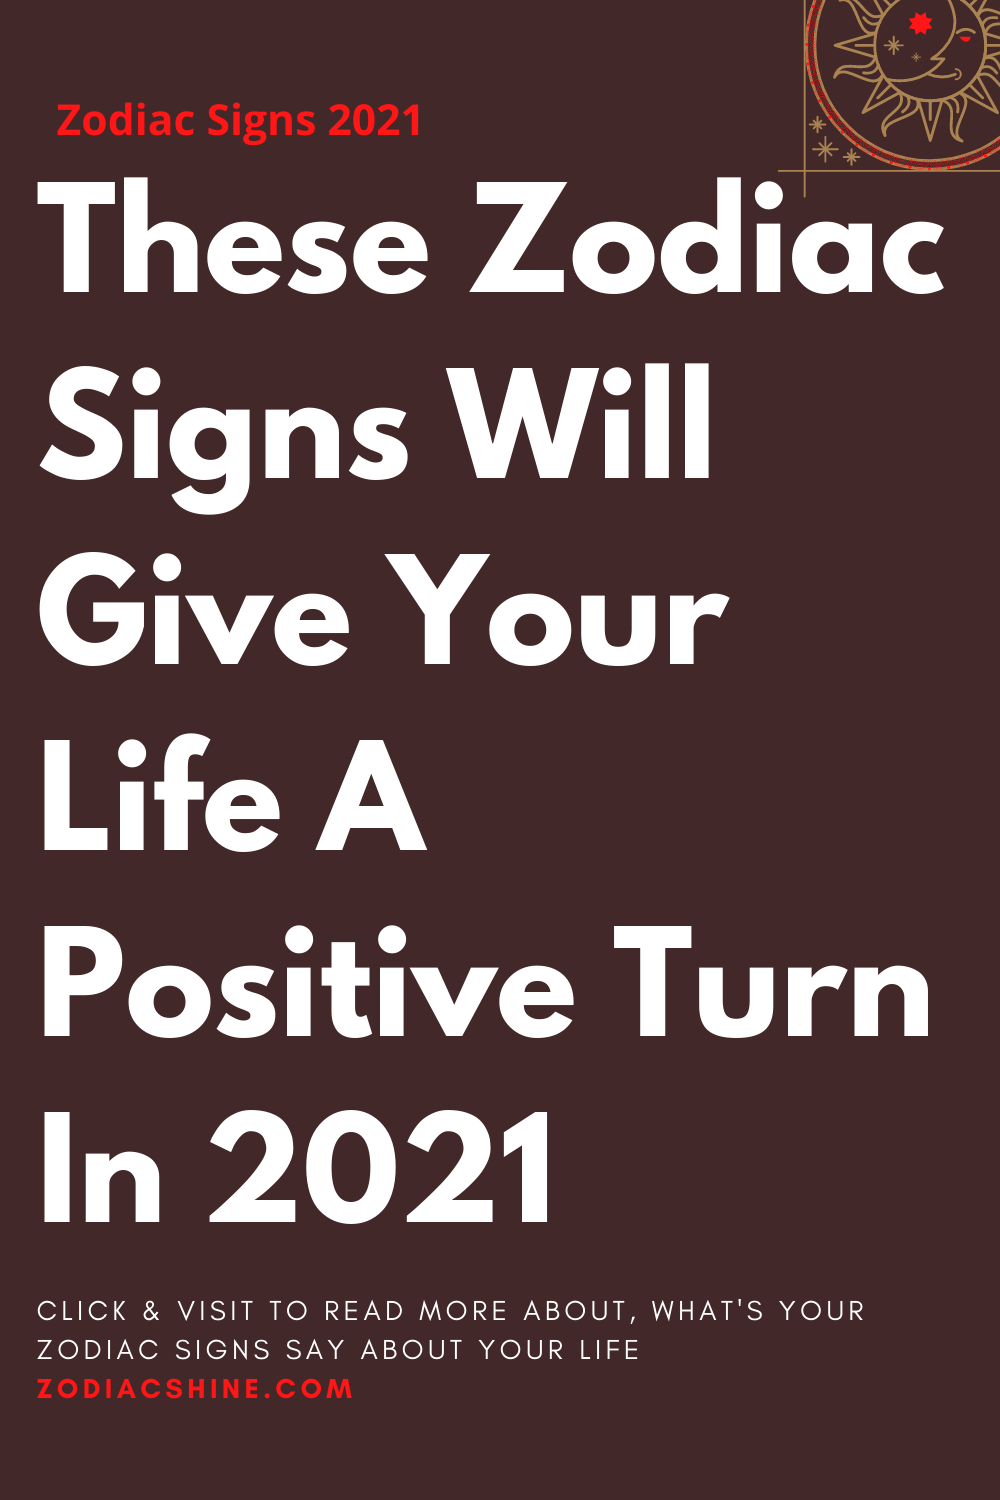 These Zodiac Signs Will Give Your Life A Positive Turn In 2021